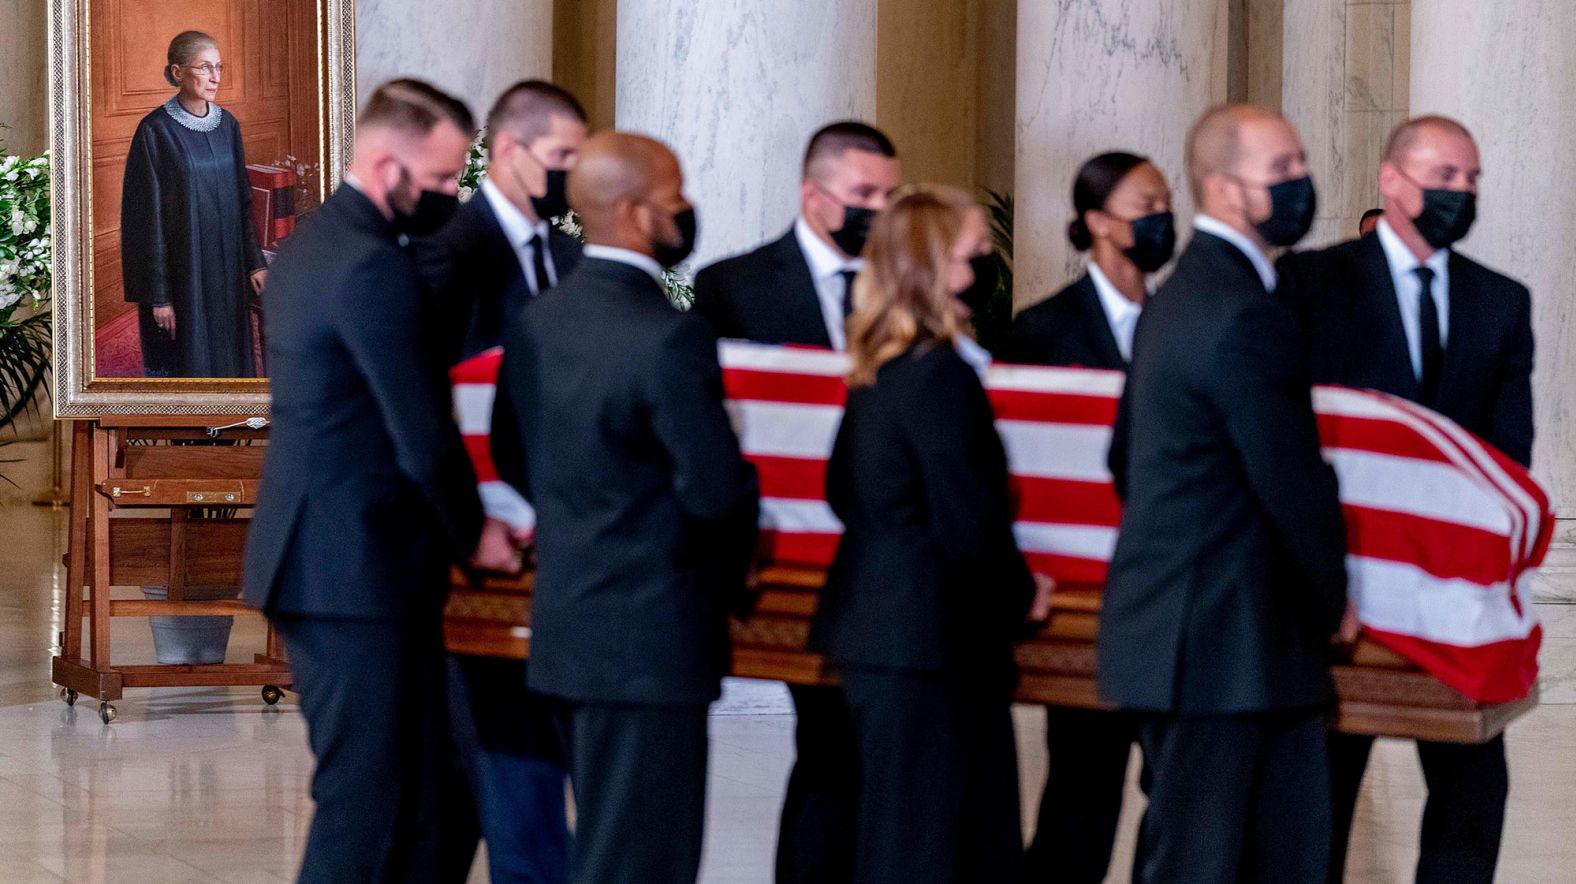 The flag-draped casket of Justice Ruth Bader Ginsburg is carried through the Great Hall at the Supreme Court in Washington.